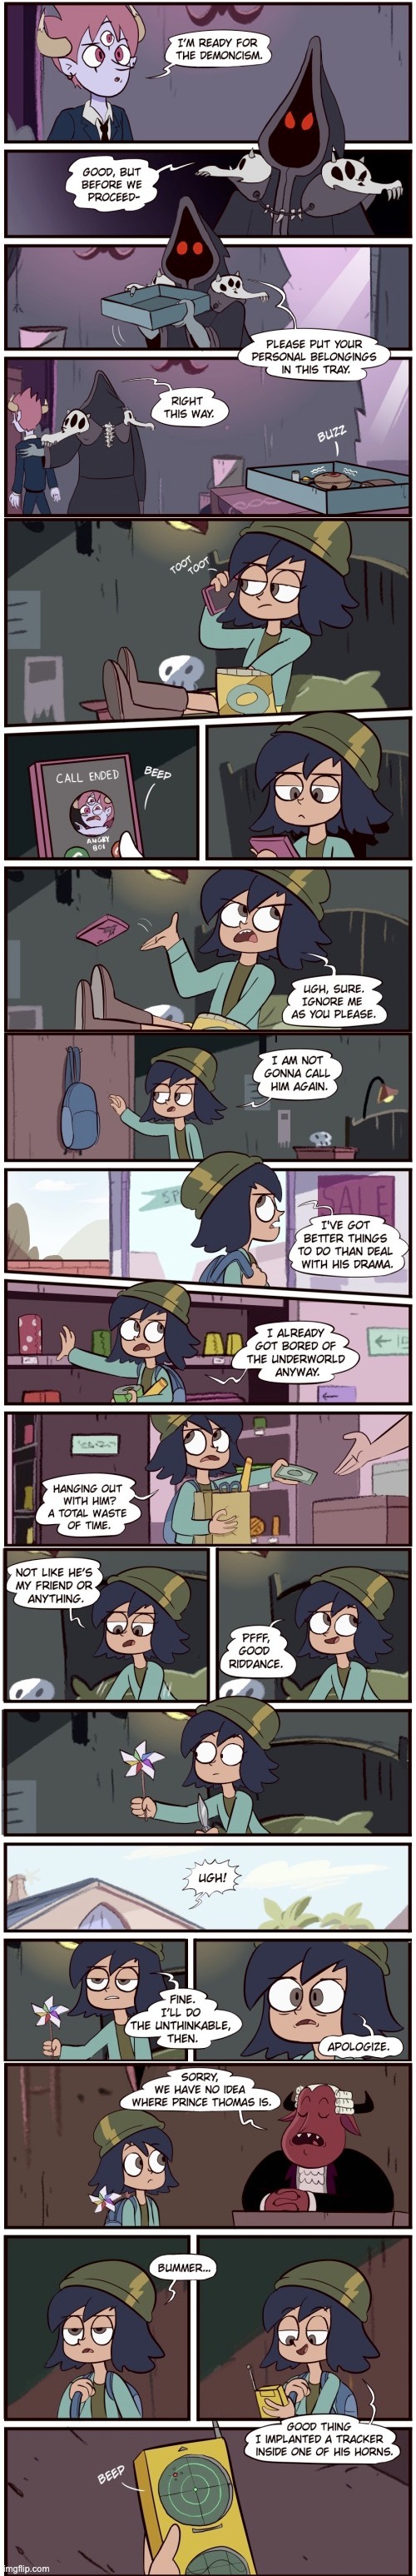 Tom vs Jannanigans: To Make A Head Spin (Part 3) | image tagged in morningmark,svtfoe,comics/cartoons,star vs the forces of evil,comics,memes | made w/ Imgflip meme maker